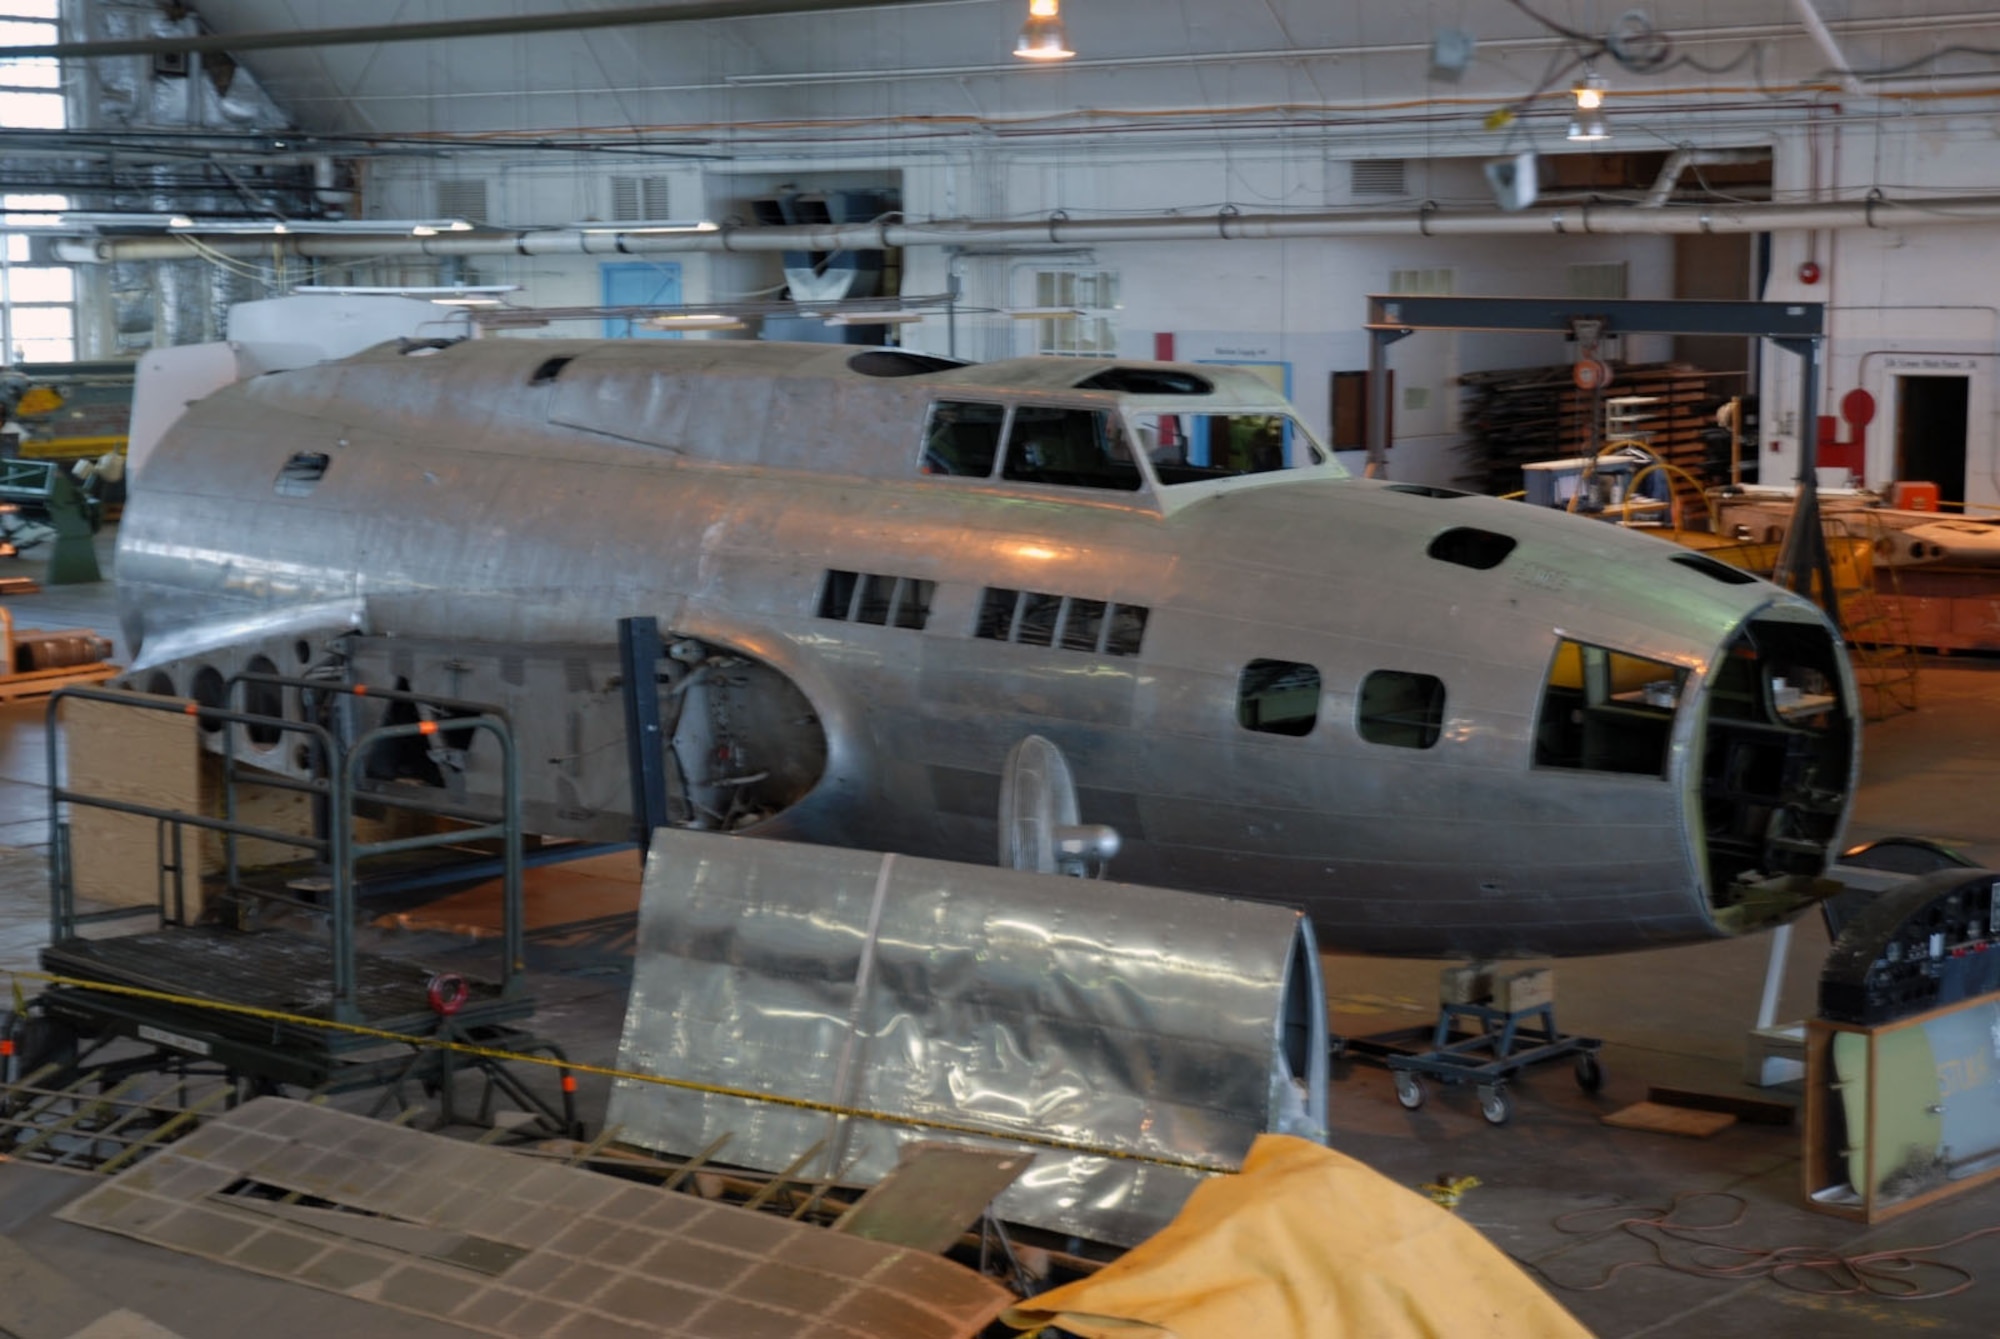 DAYTON, Ohio (11/2007) -- The B-17F "Memphis Belle" in the restoration hangar at the National Museum of the United States Air Force. (U.S. Air Force photo)